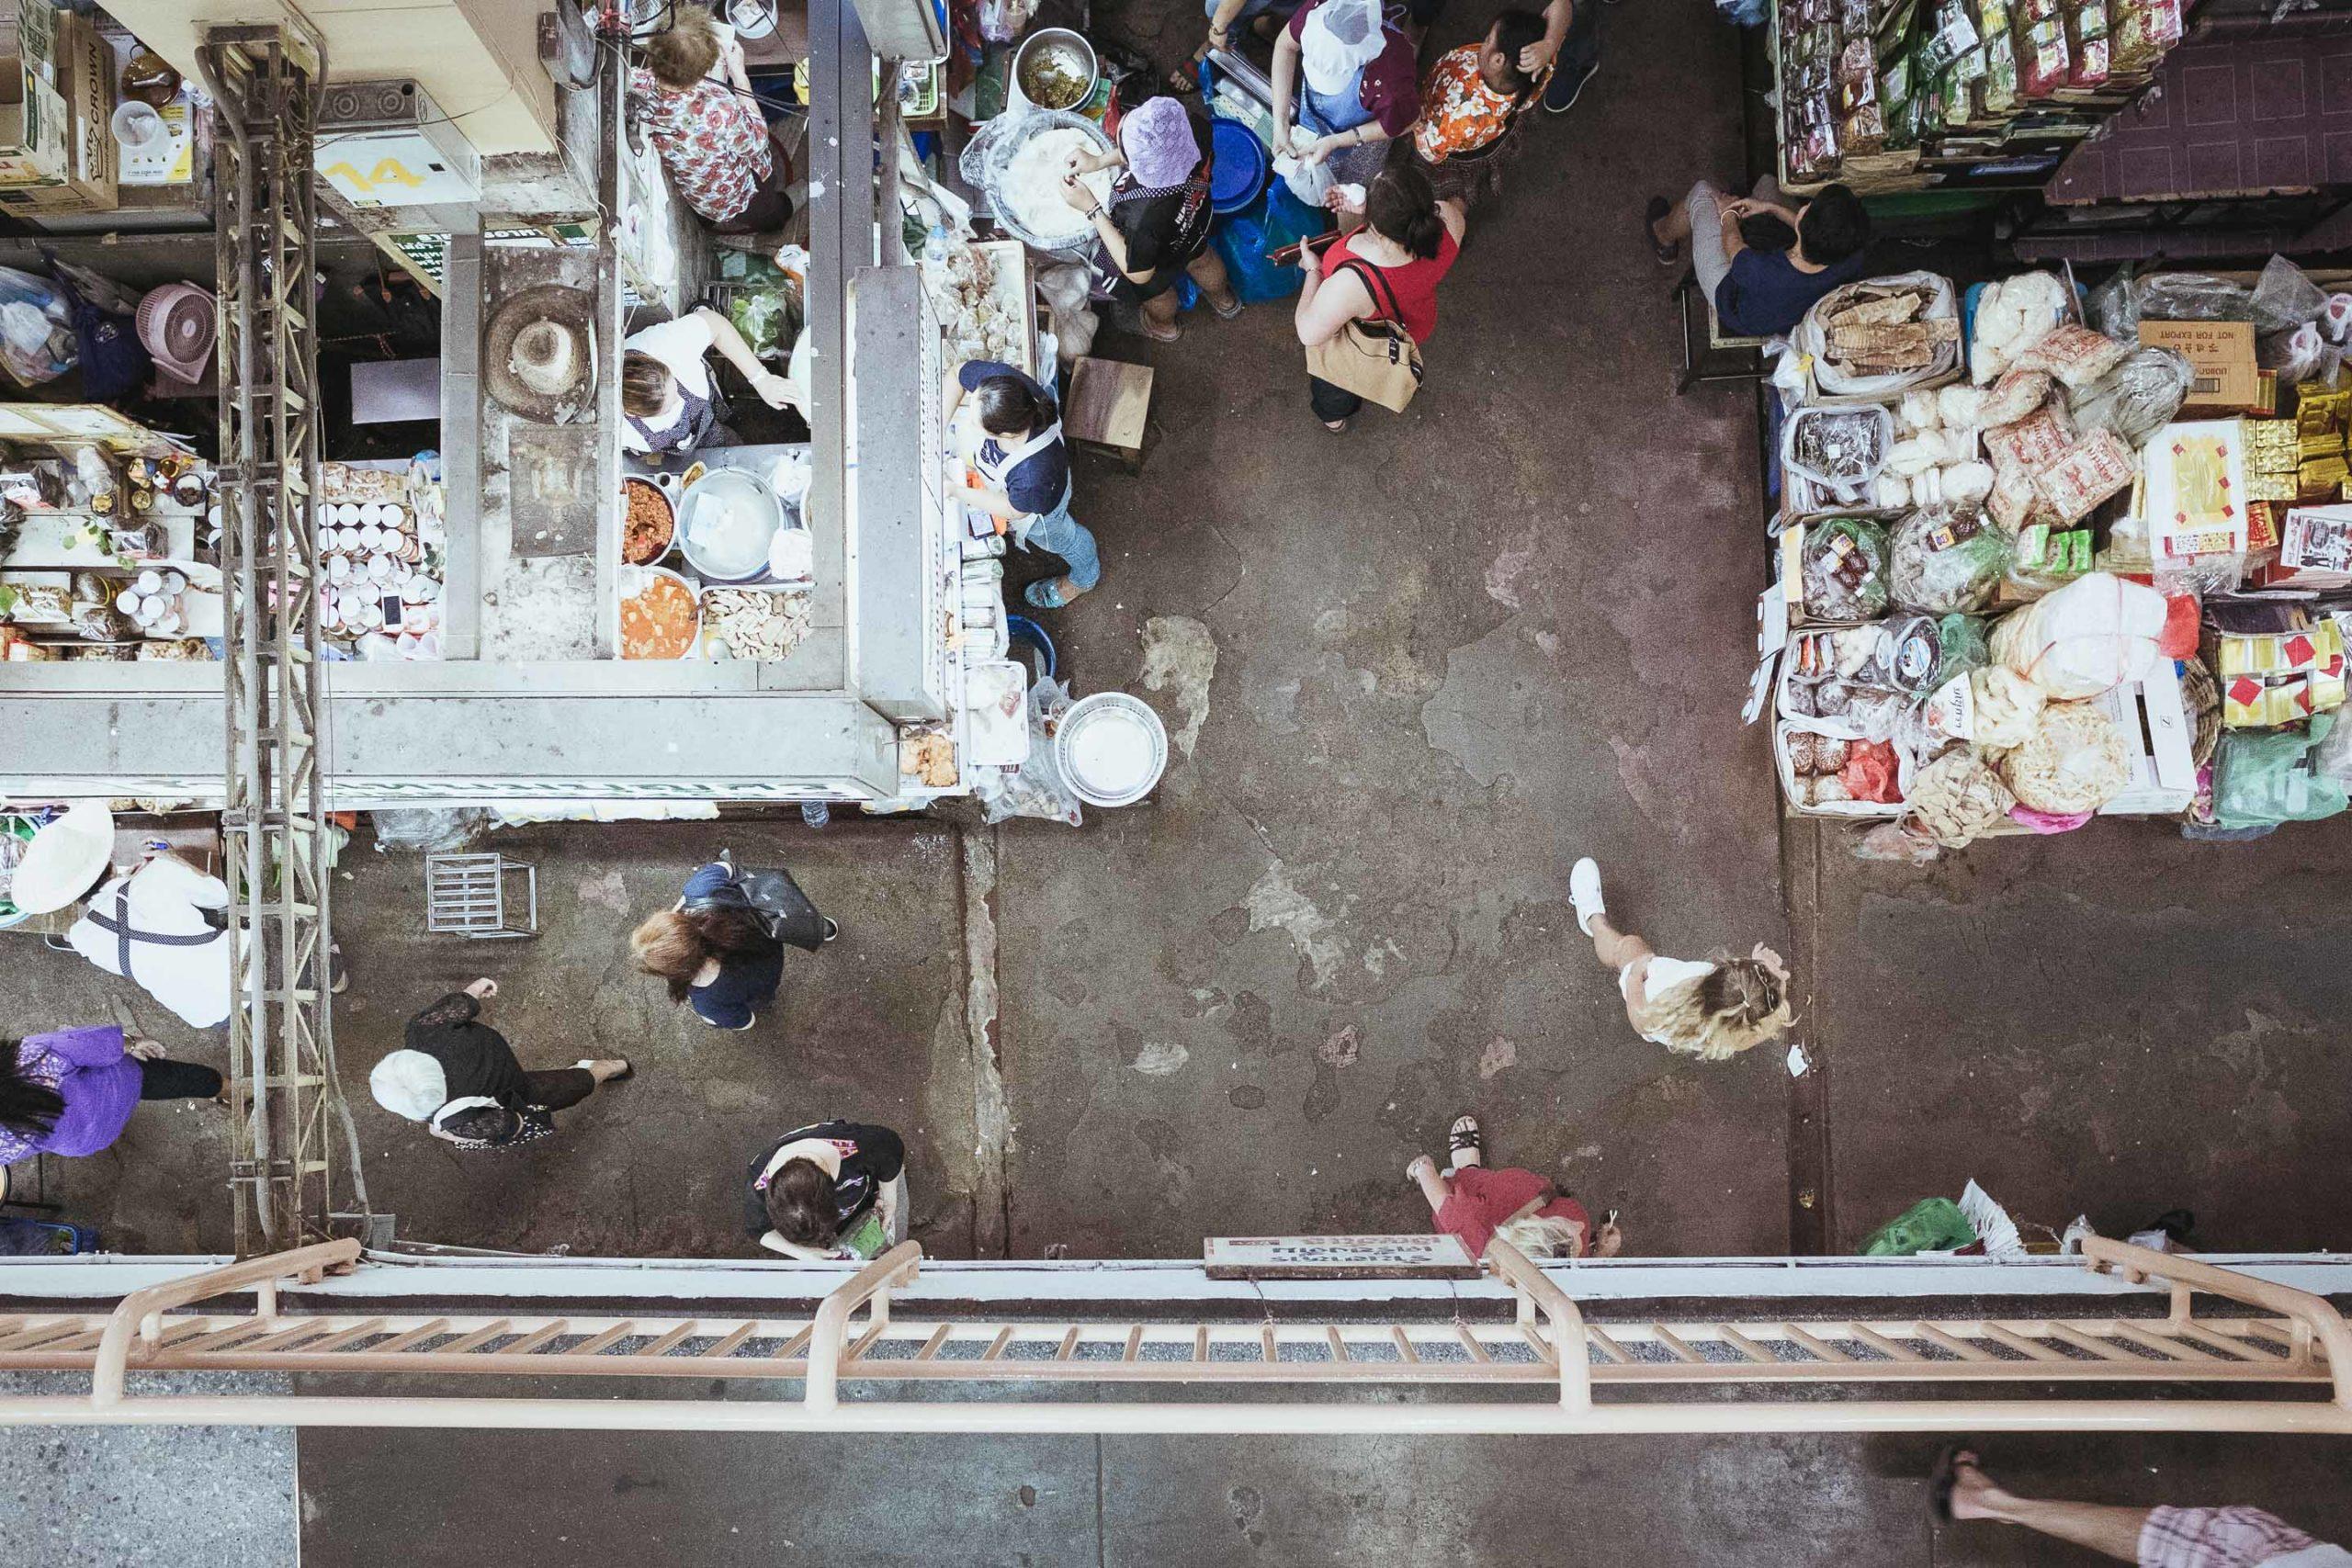 This image shows one of a series of photos taken in Chiang Mai, Warorot Market.